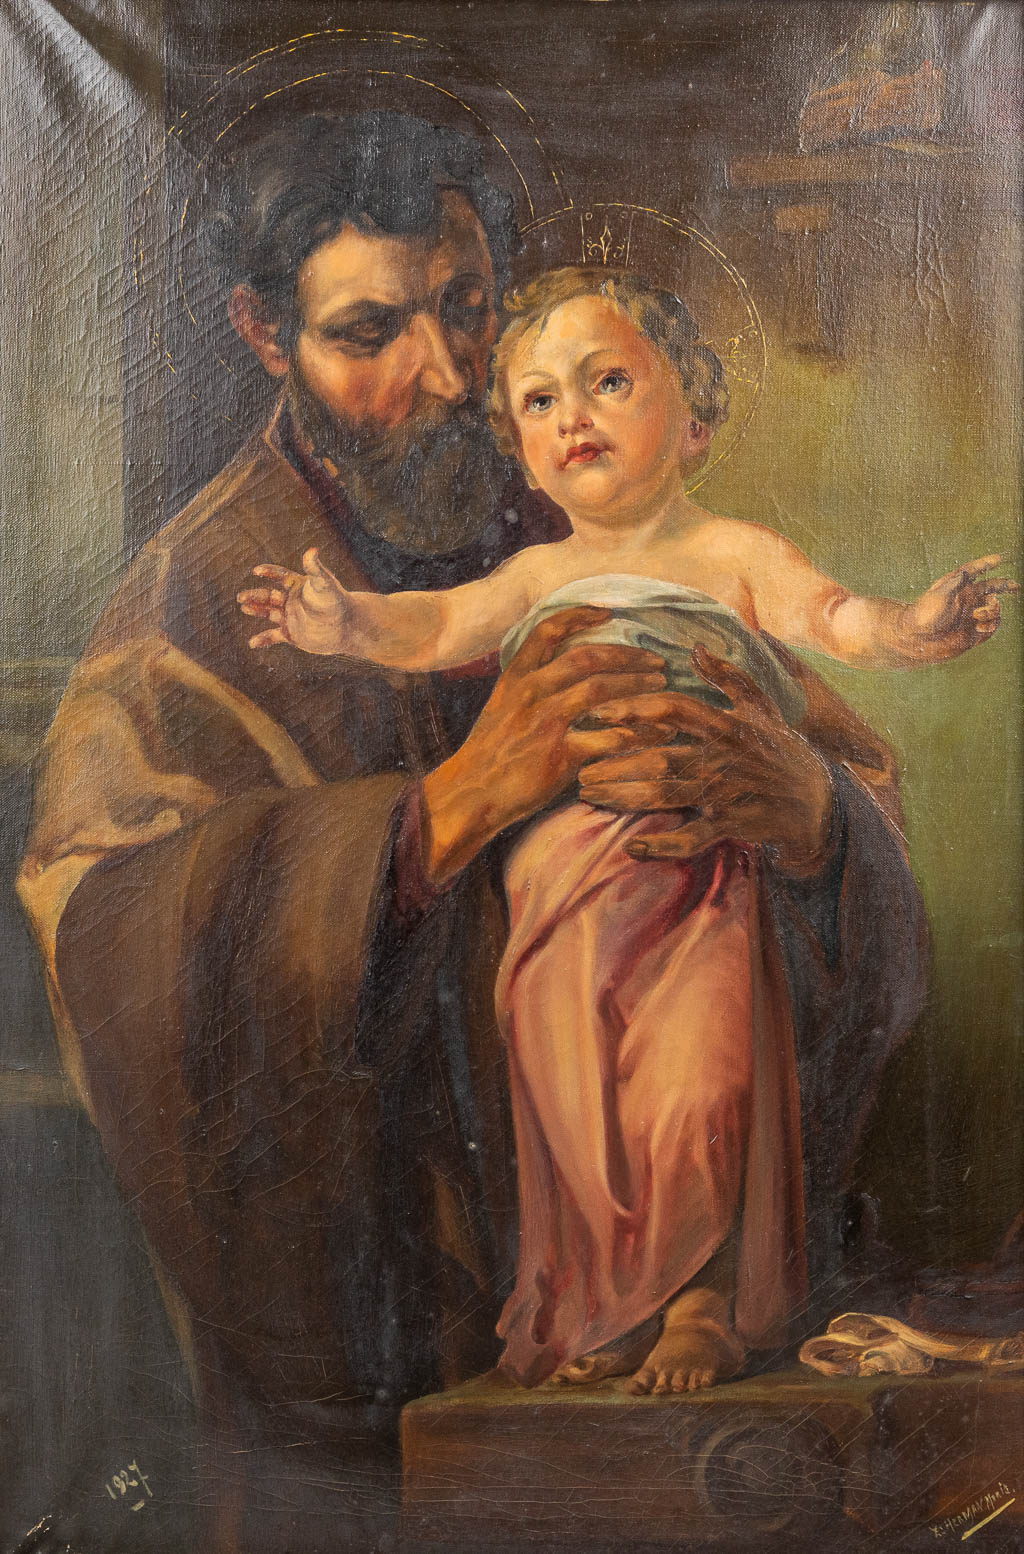 Herman Maris (XX) 'Joseph with Christ' 'Mary with Christ' a Pendant painting, oil on canvas. 1927. (61 x 90 